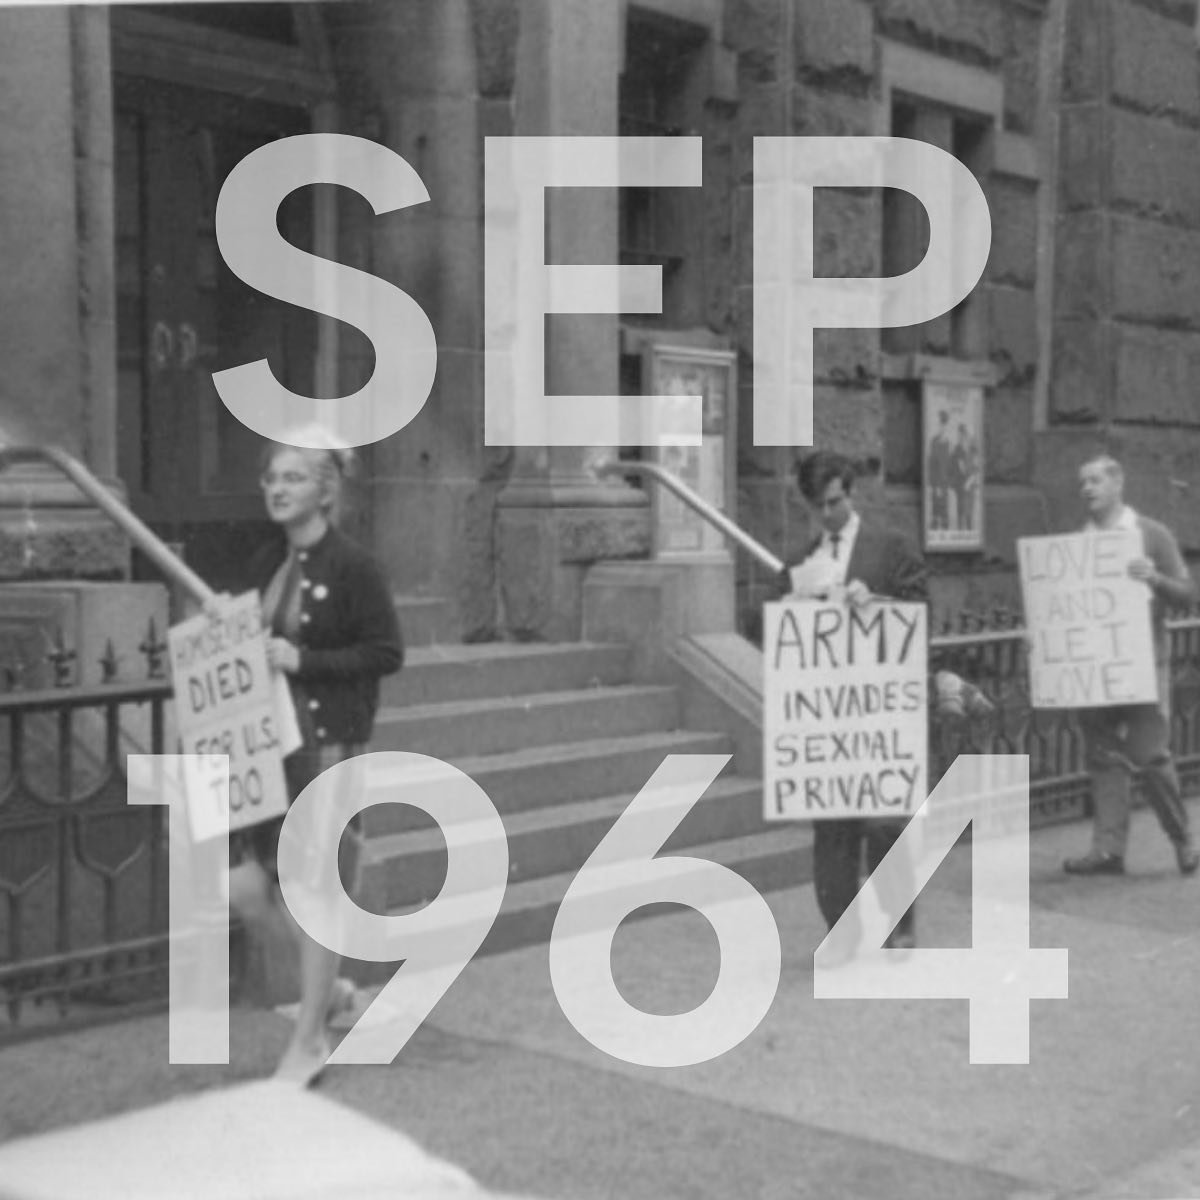 Did you know the first demonstration for LGBTQ+ rights in the US happened five years before Stonewall?

On September 19, 1964, Randy Wicker organized a protest outside of the U.S. Army Building in Lower Manhattan to protest the military&rsquo;s discr